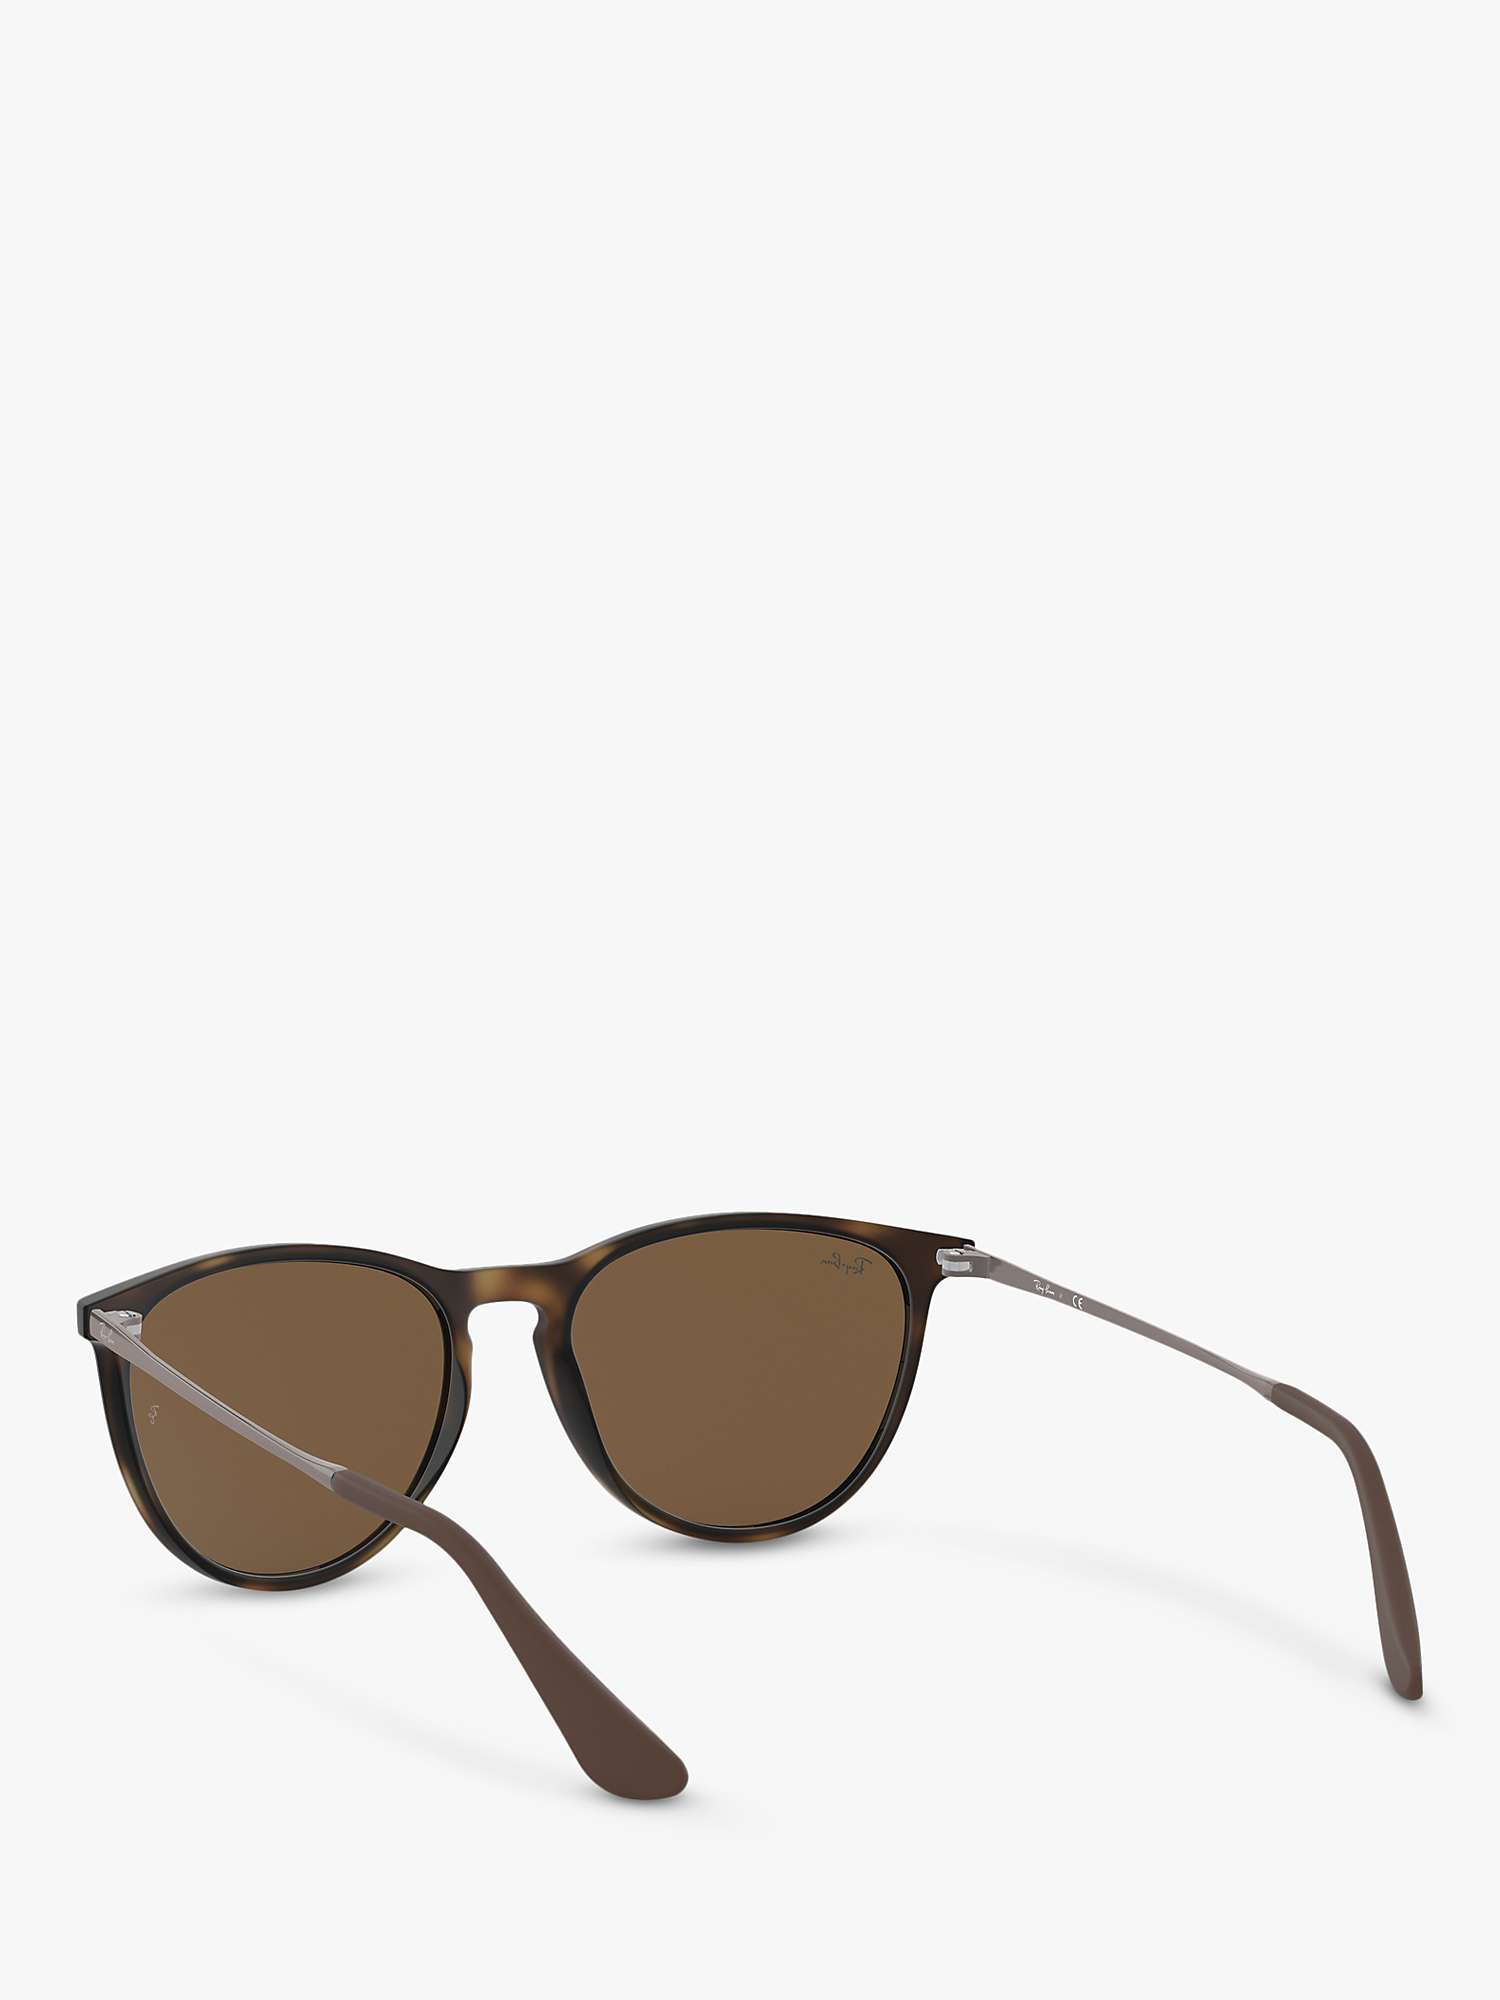 Buy Ray-Ban Junior RJ9060S Izzy Oval Sunglasses Online at johnlewis.com